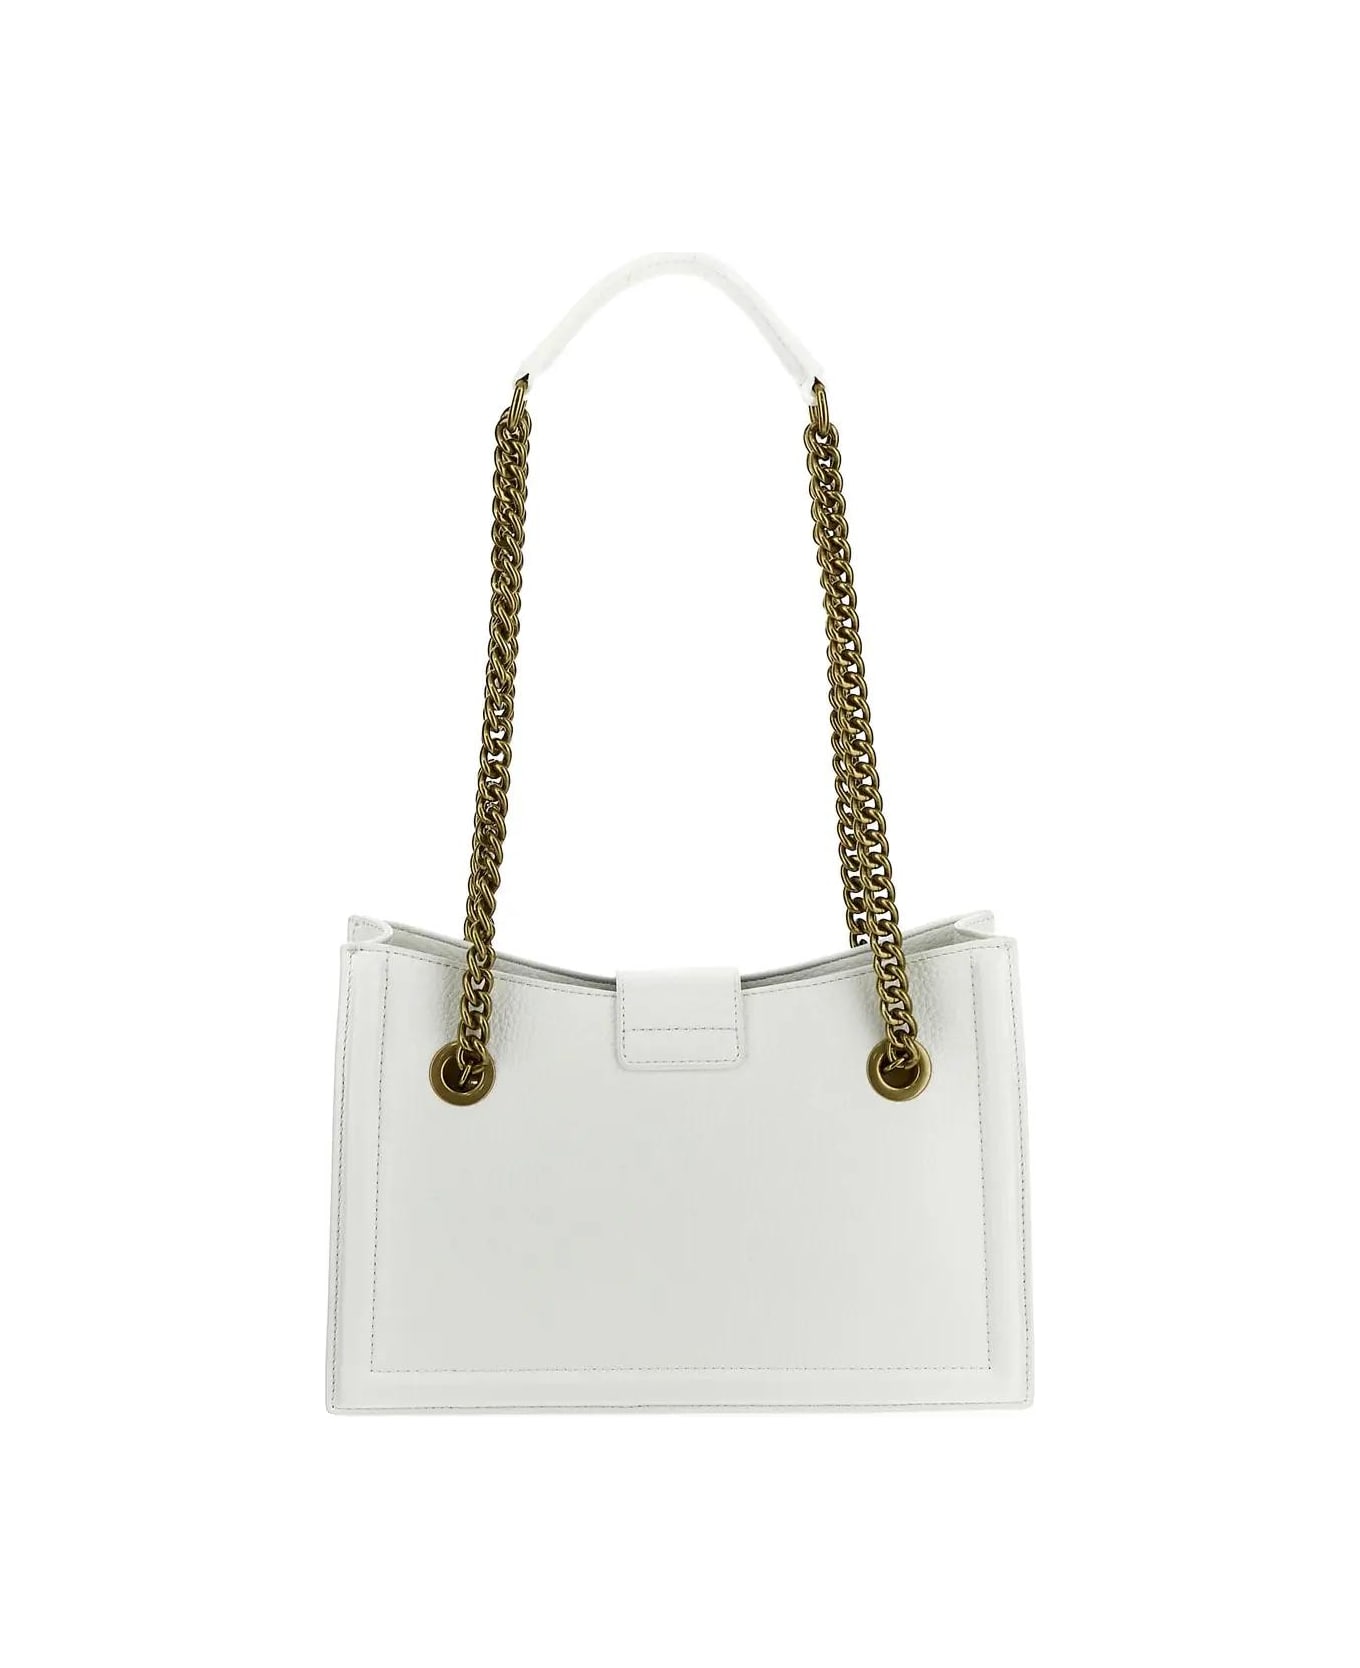 Versace Jeans Couture Embossed Buckle Shoulder Bag - White ショルダーバッグ